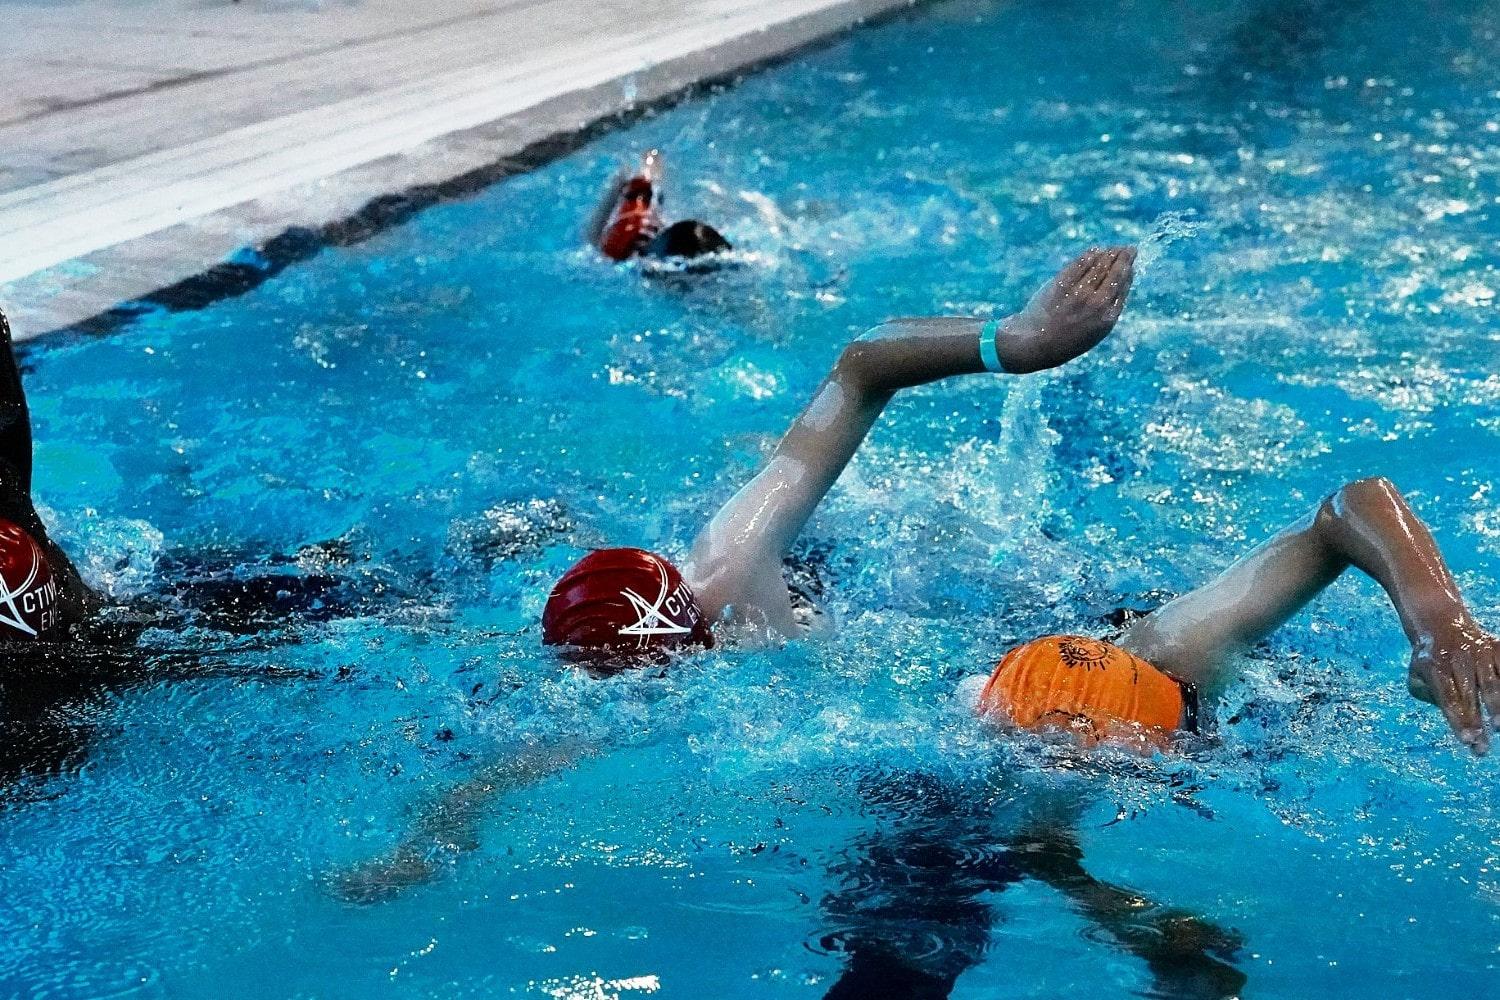 Competitive swimming race with swimmers in lanes, splashing water, and reaching for the finish line.